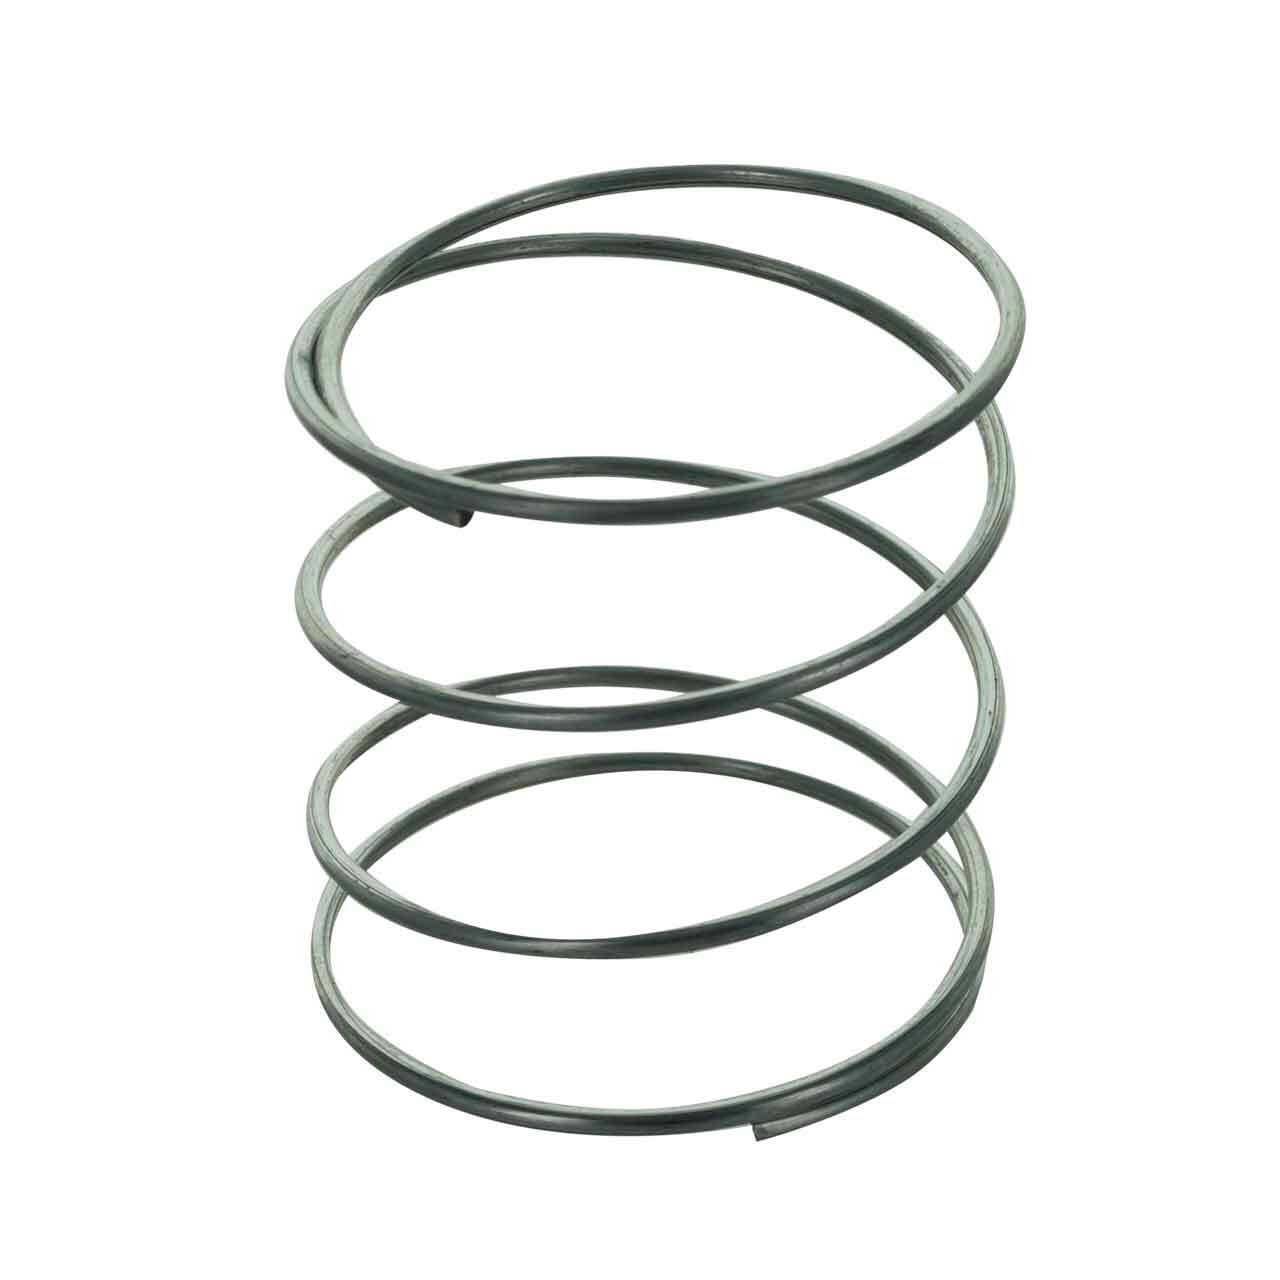 Miller 2.305" X .090" X 2.500" Compression Spring For Millermatic 300 And 250 Arc Welding Power Source